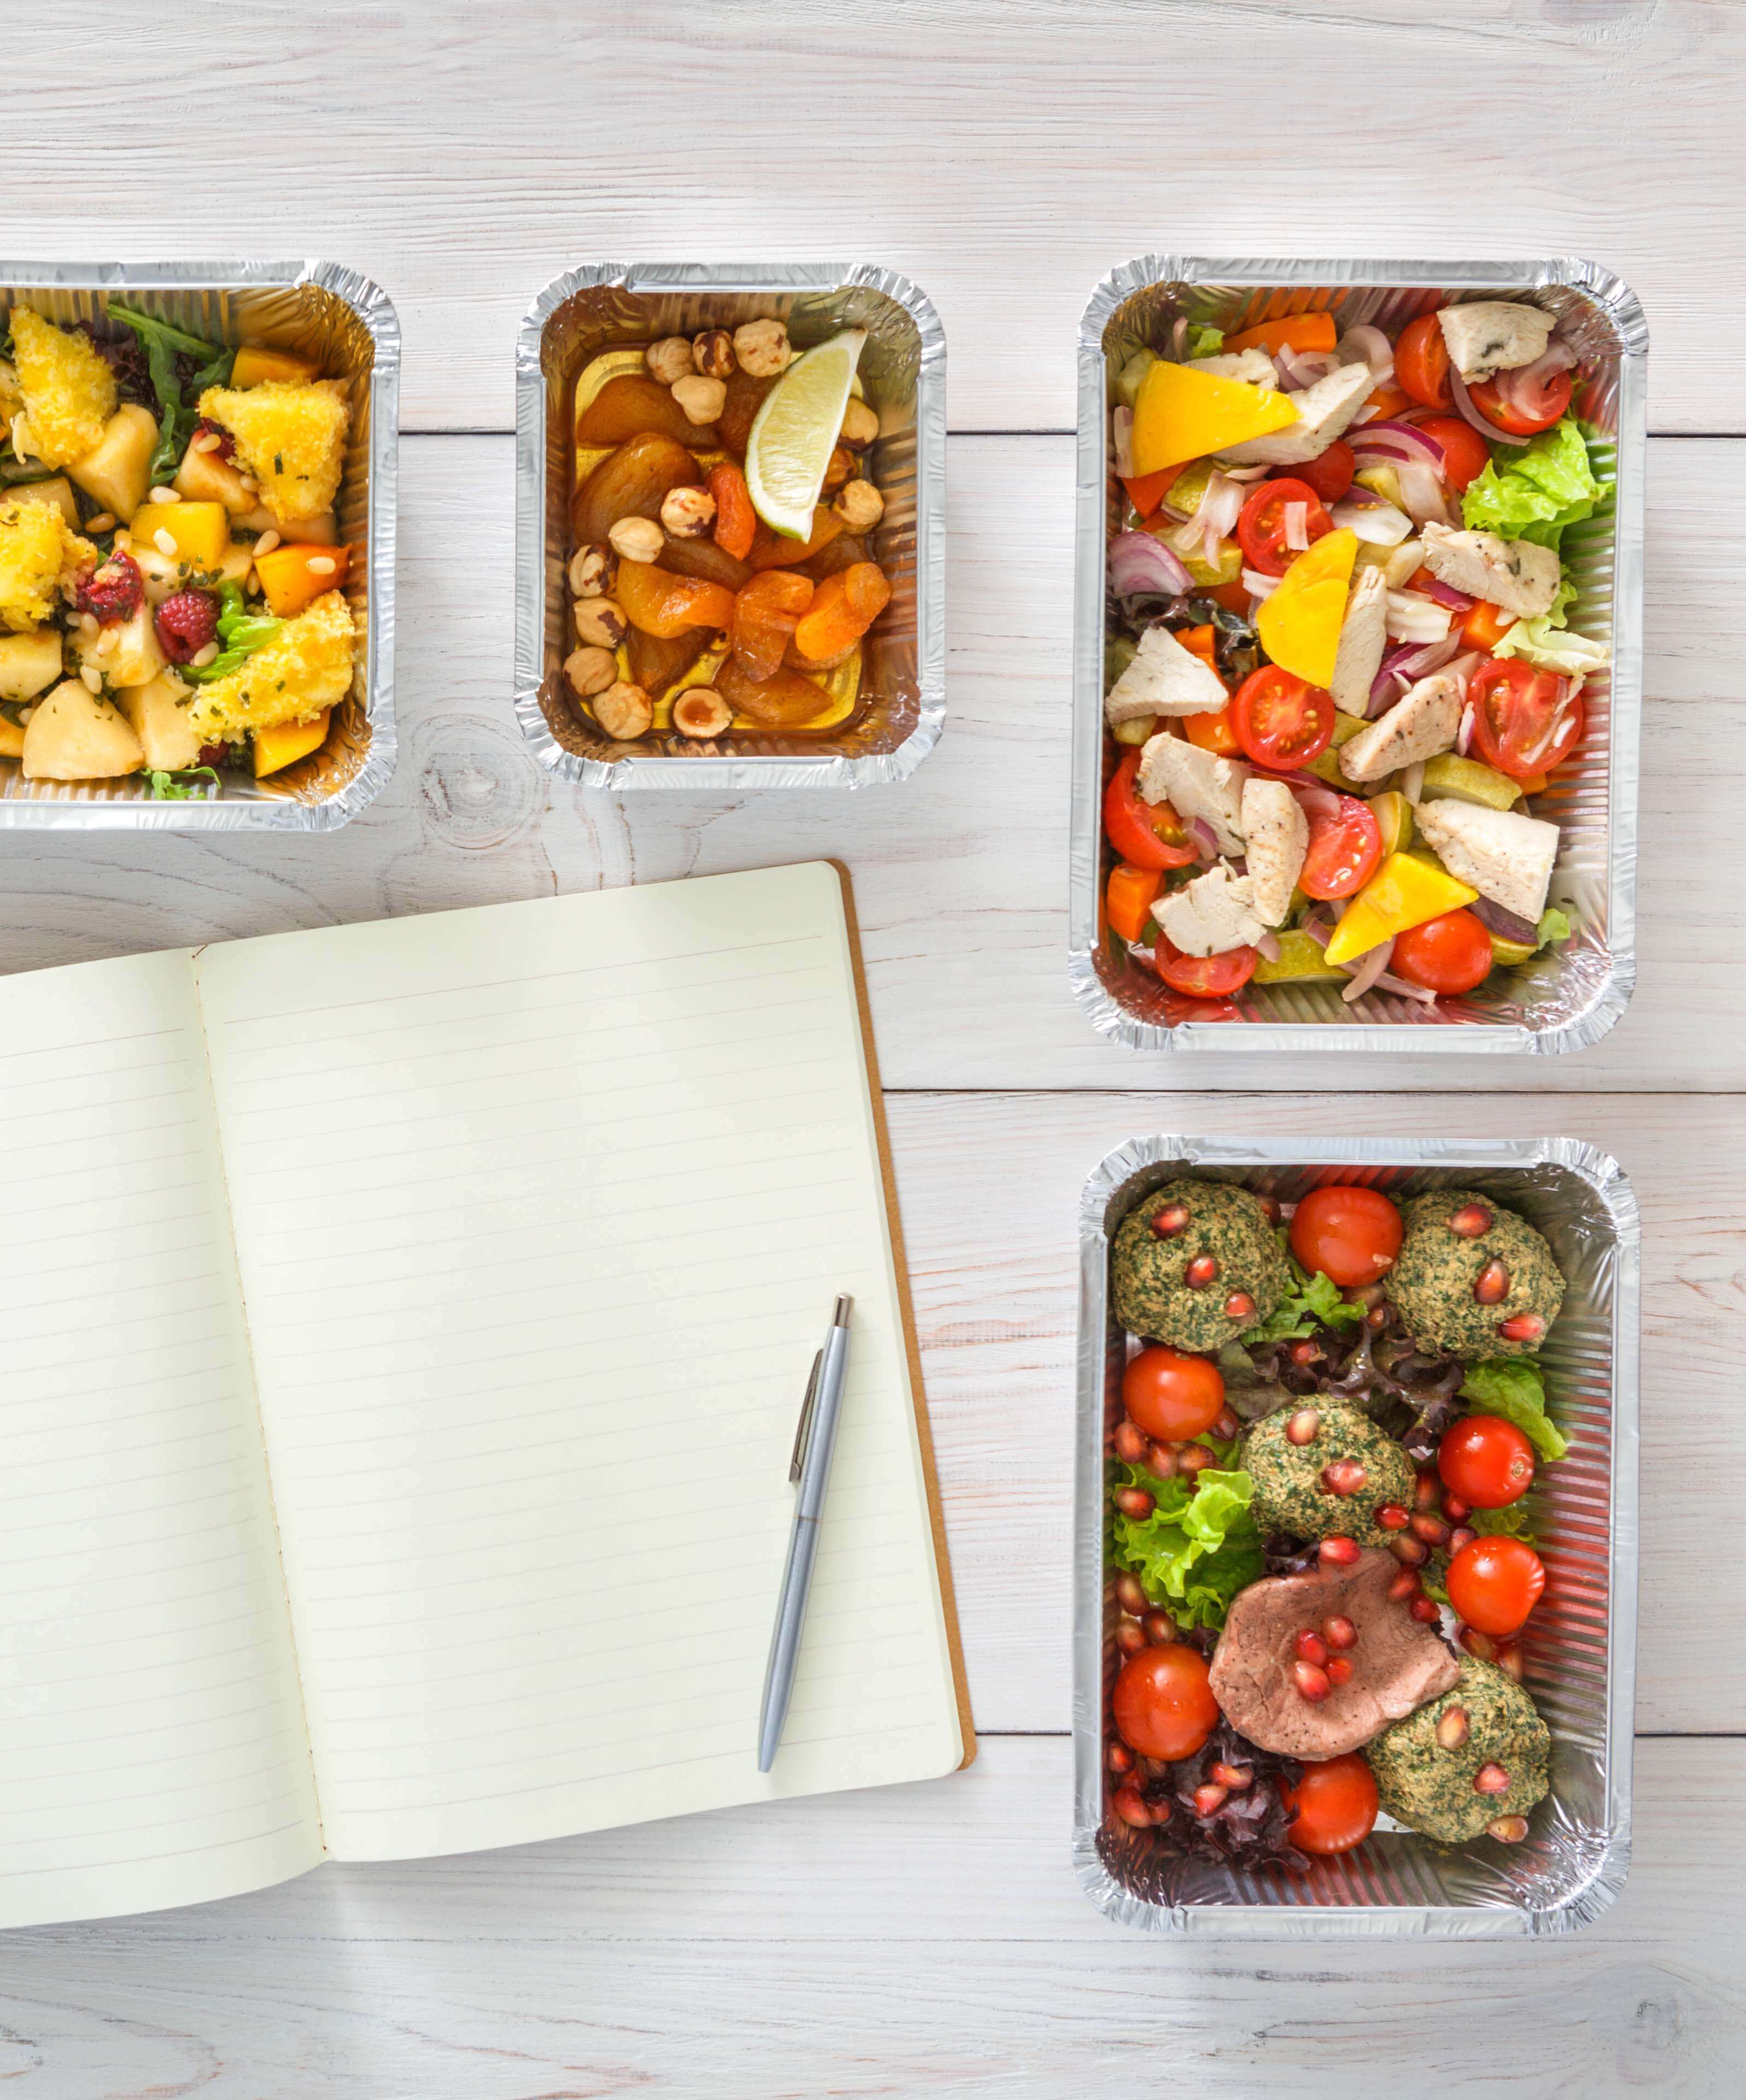 Back to School Meal Planning